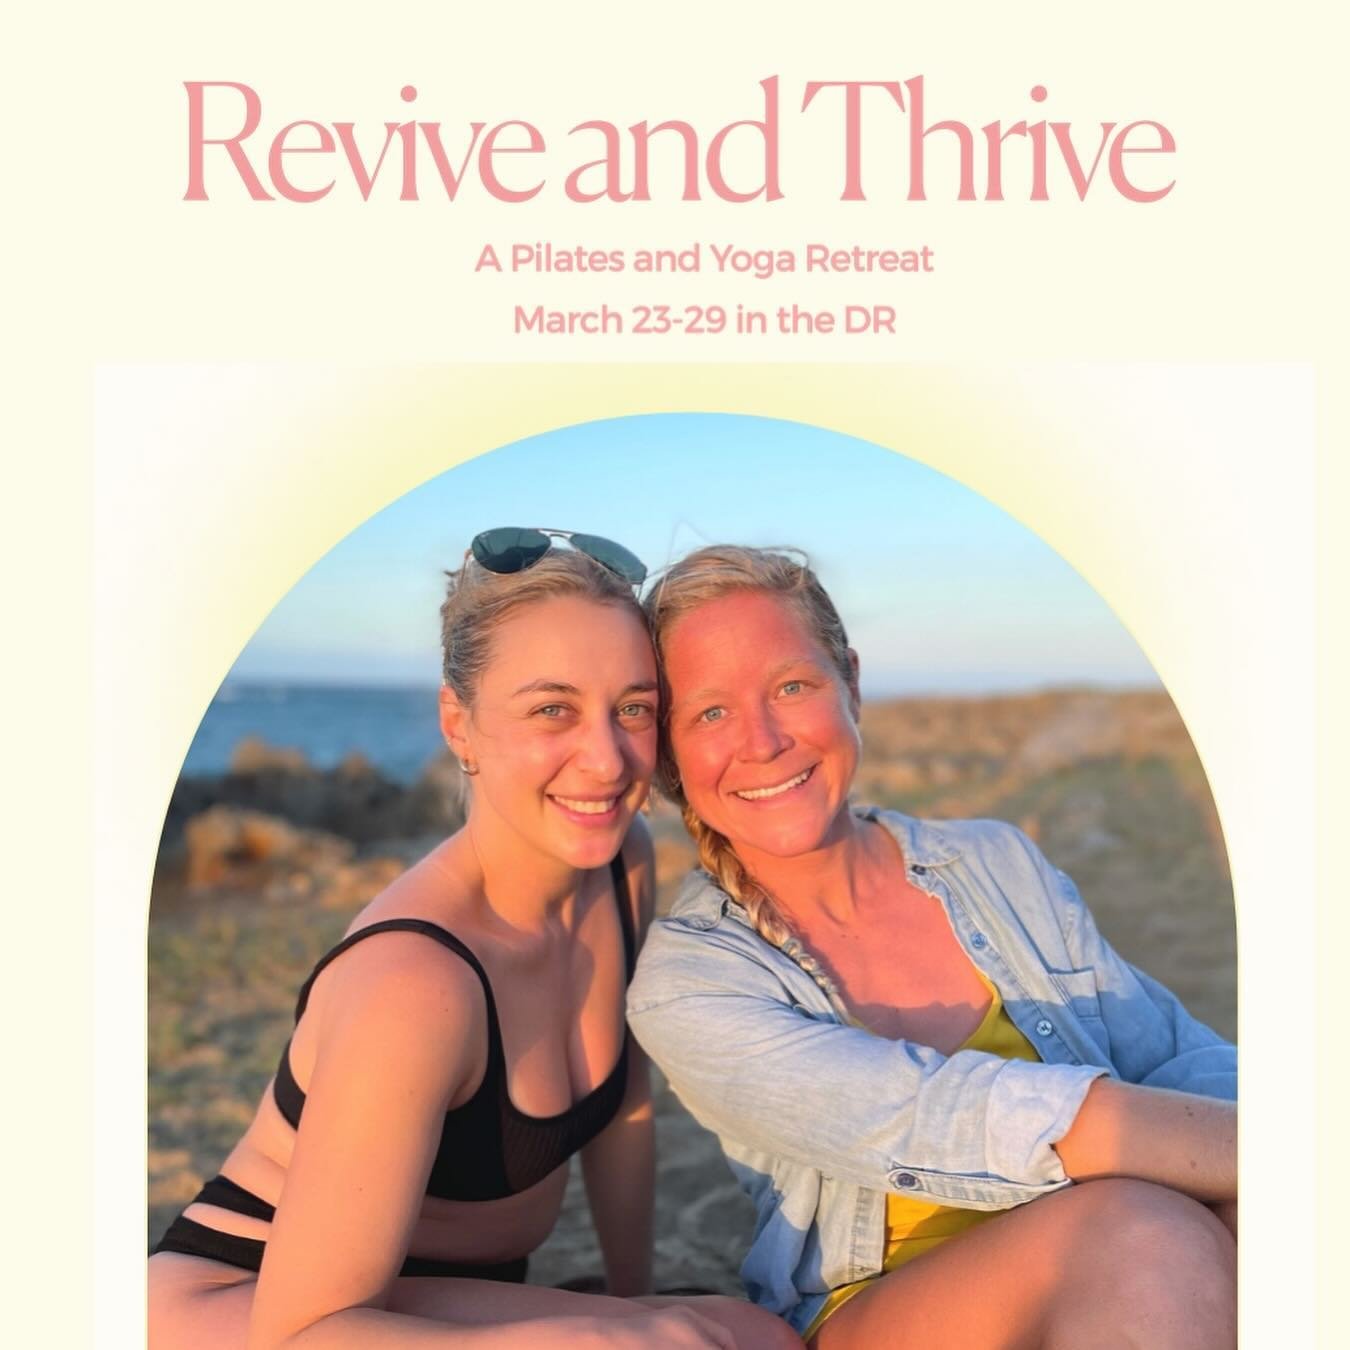 ☀️2 Spots Left for Our March 2024 Pilates and Yoga Retreat in the DR☀️

REVIVE AND THRIVE with @chrissylefavour and I,  March 23-29th 2024 in Cabarete, DR. Join us for a week of movement, connection and nature time in lush, eco-friendly jungle resort